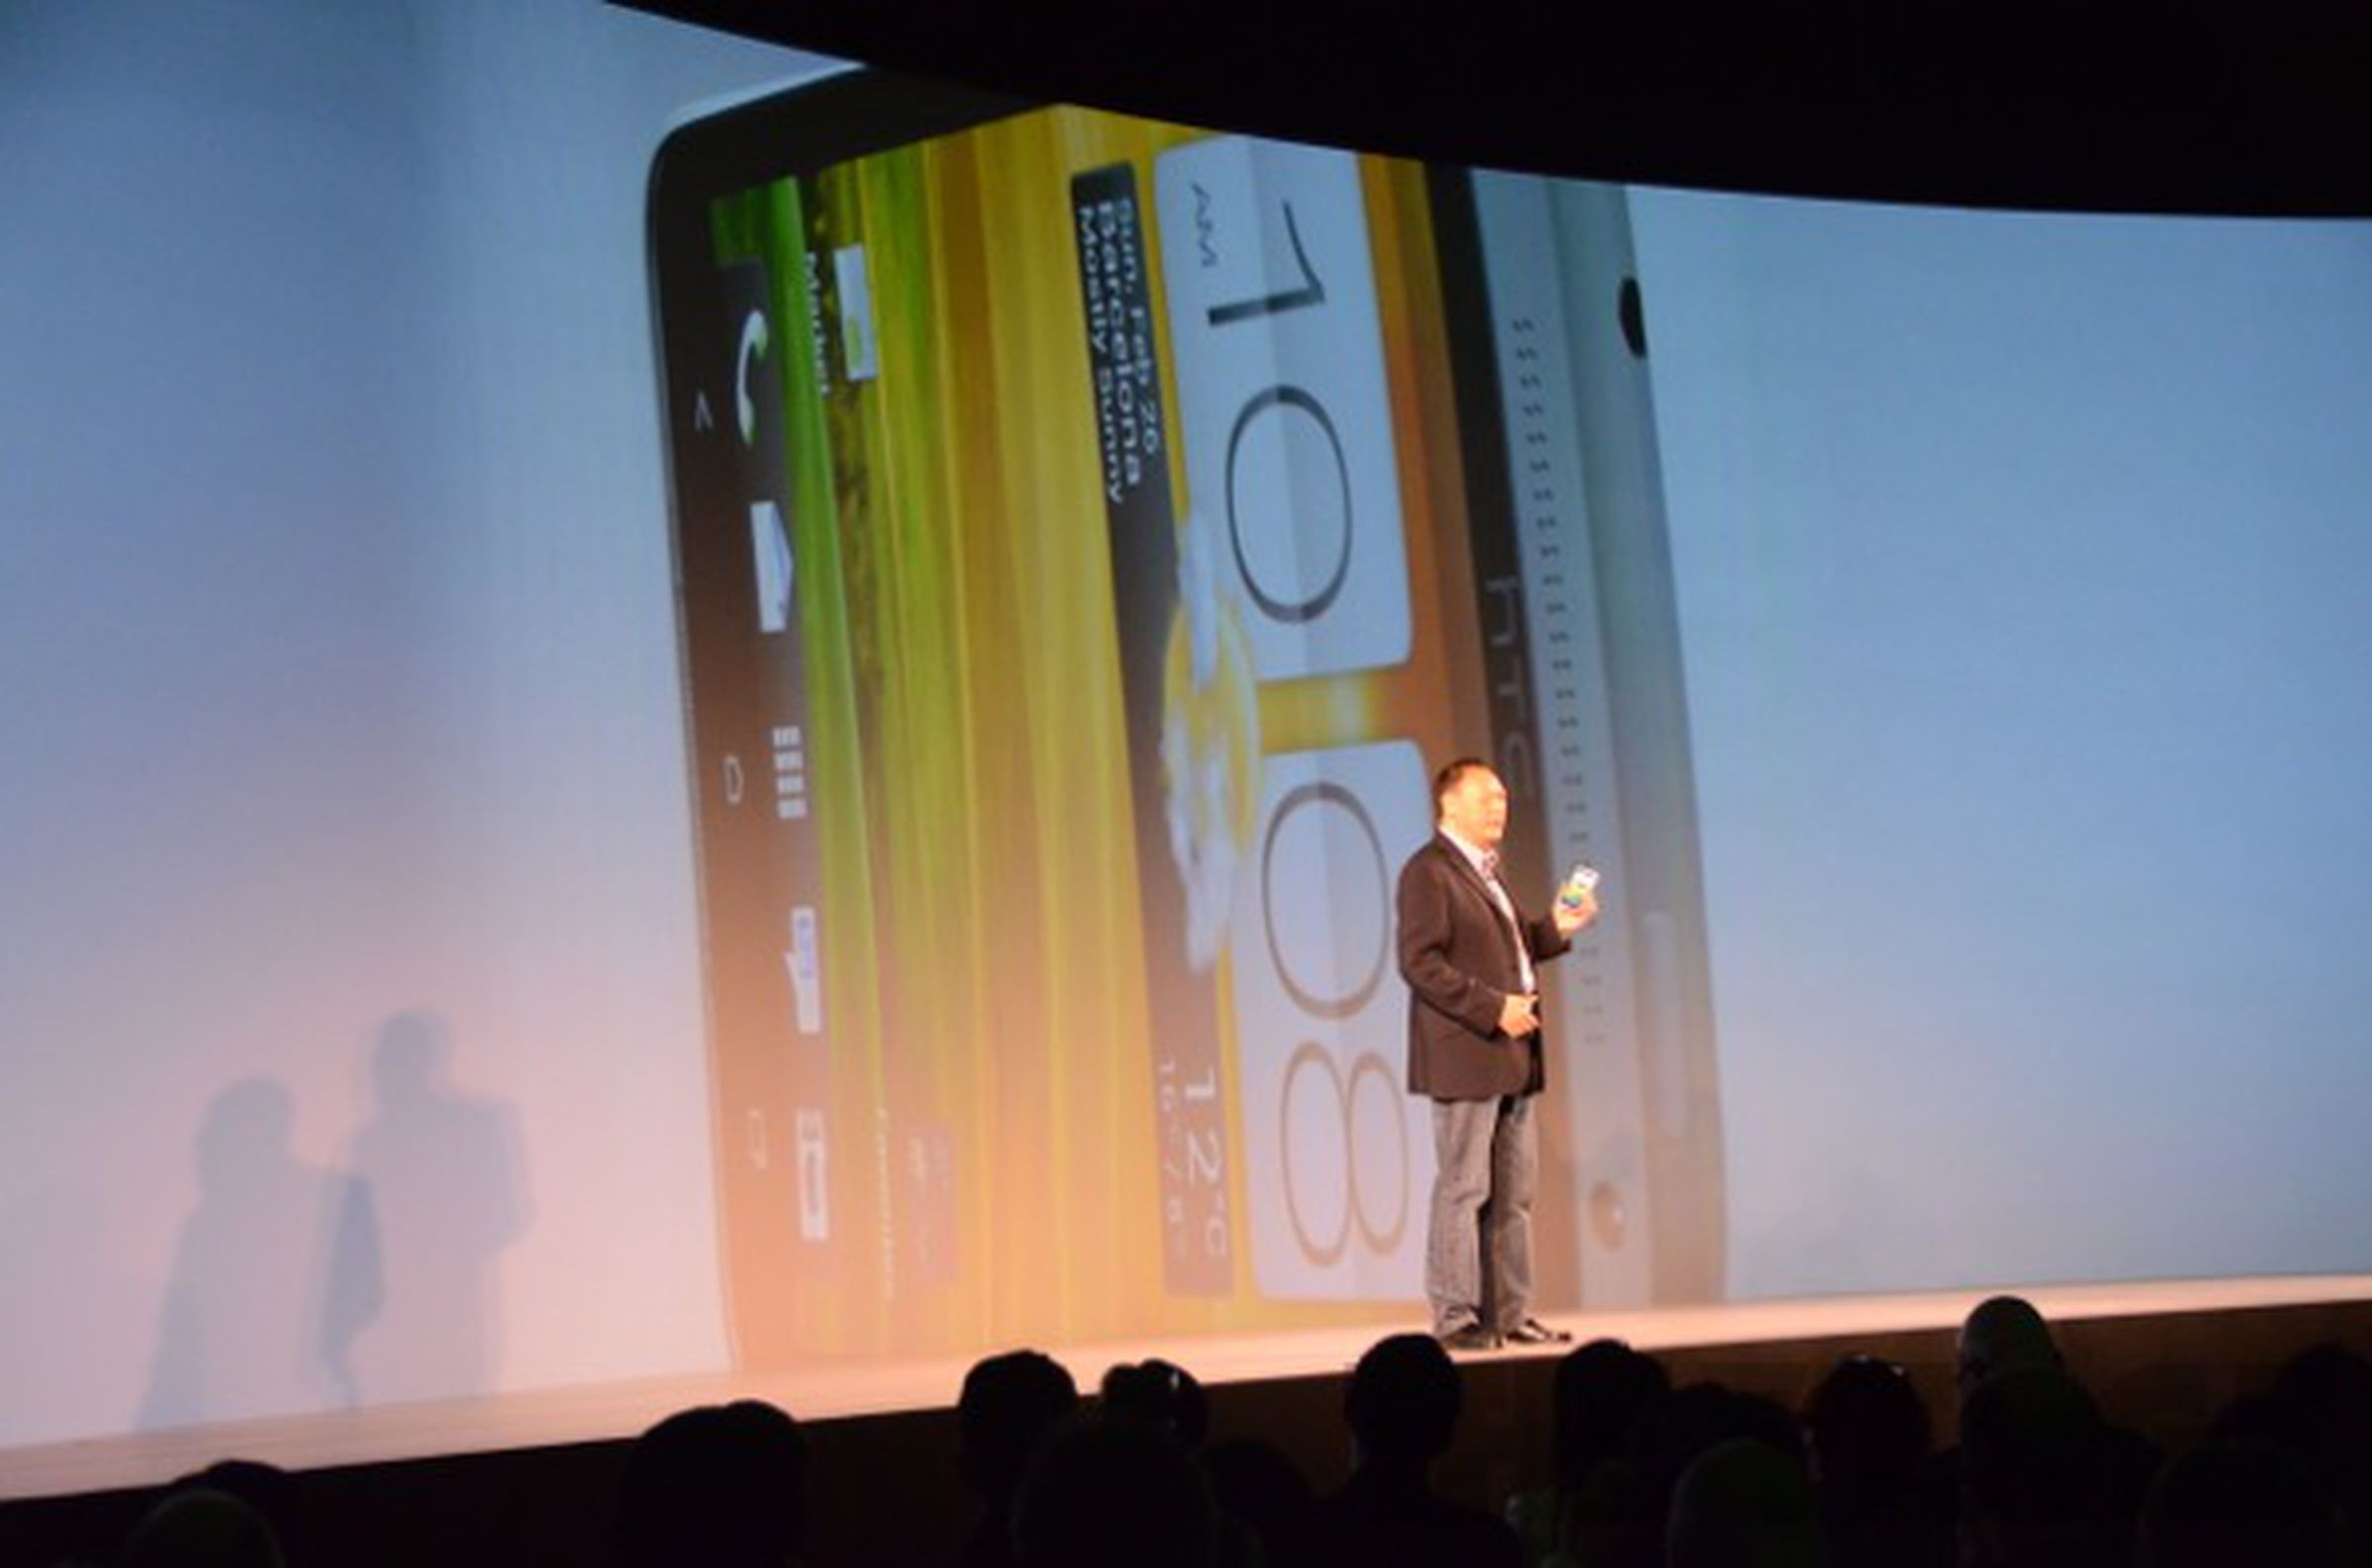 HTC One X in pictures